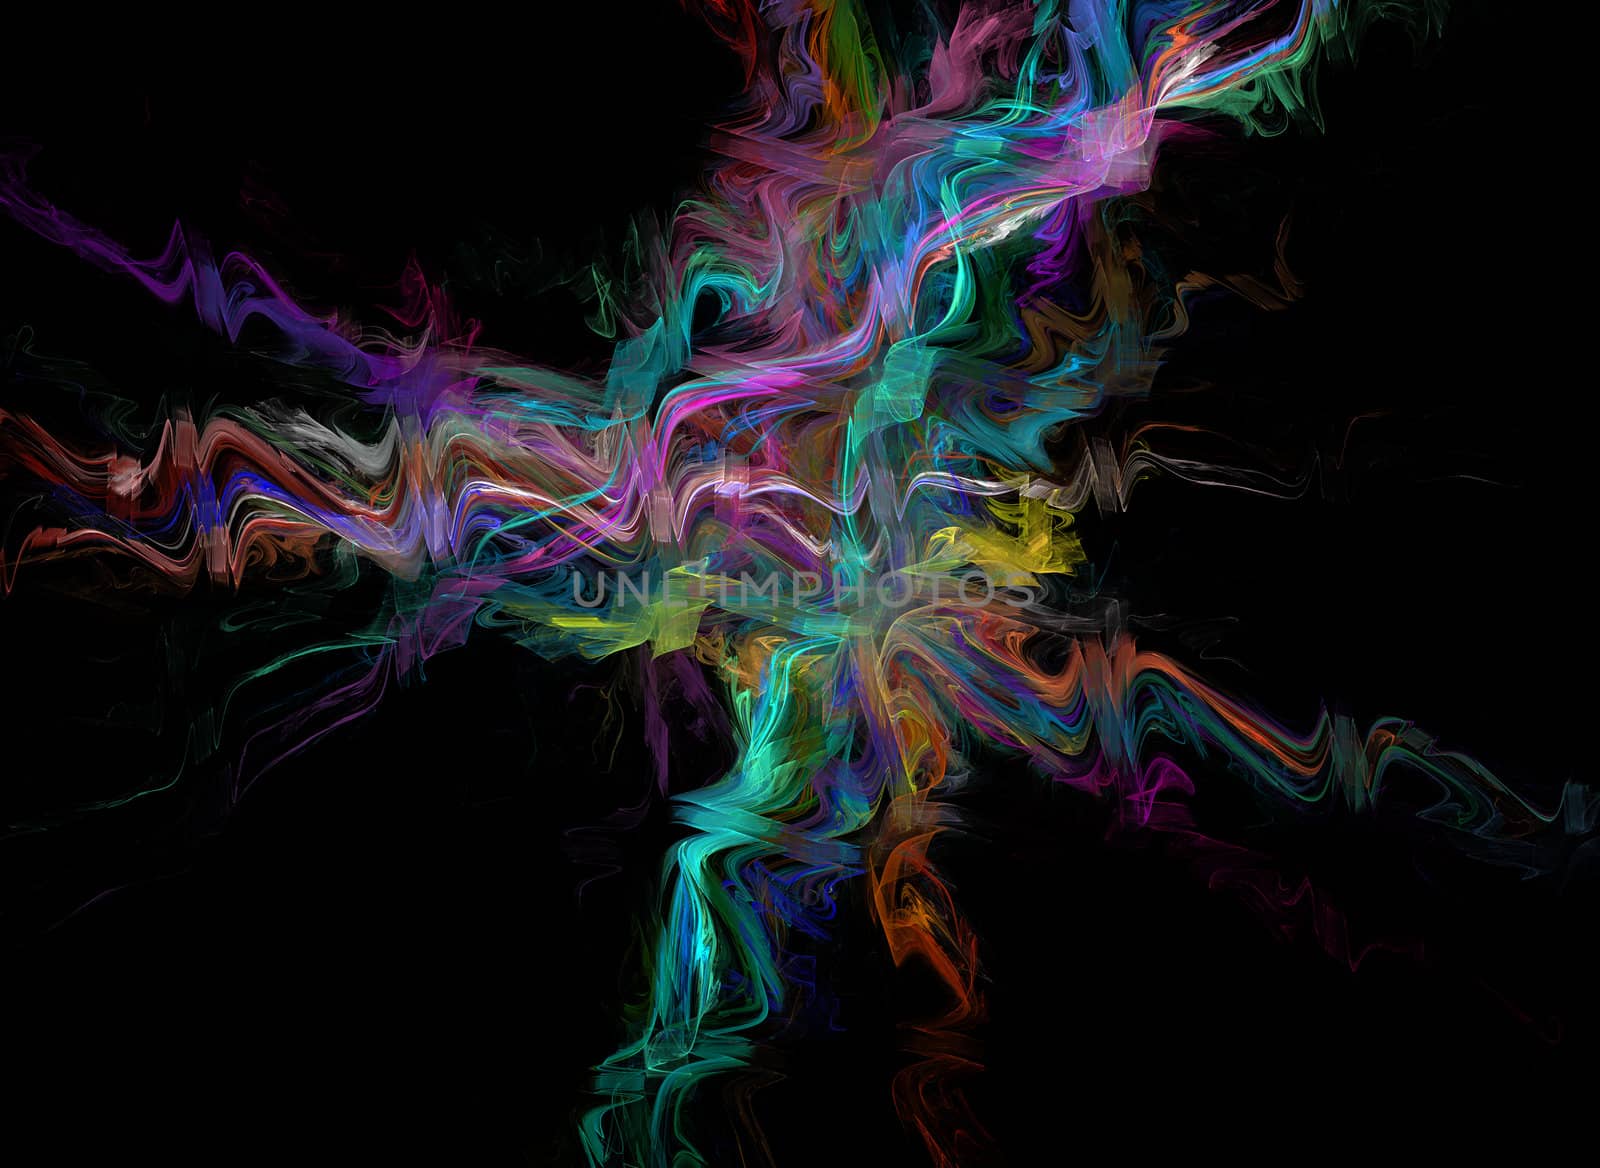 Black background with colorful shapes and abstract forms. by FernandoCortes